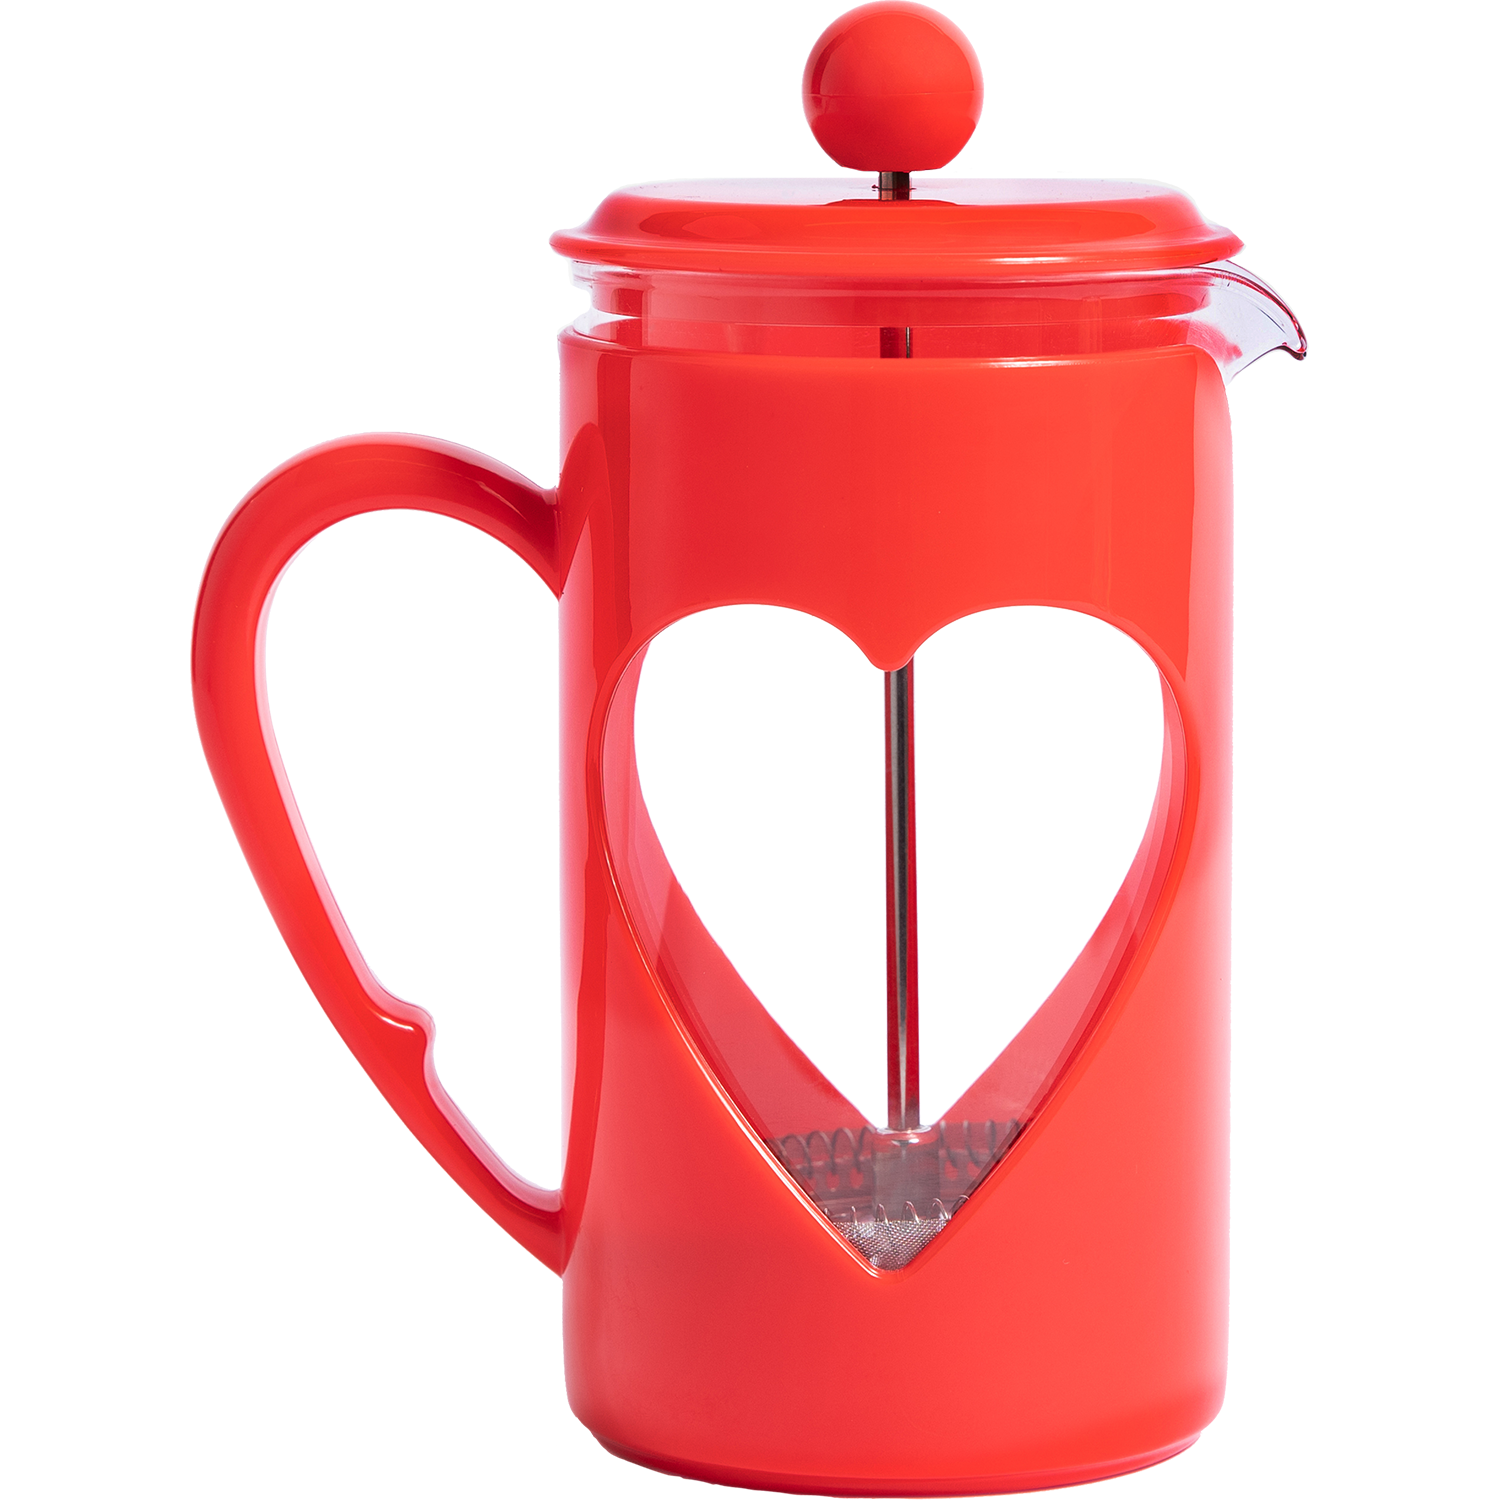 The Lover's French press by Couplet Coffee